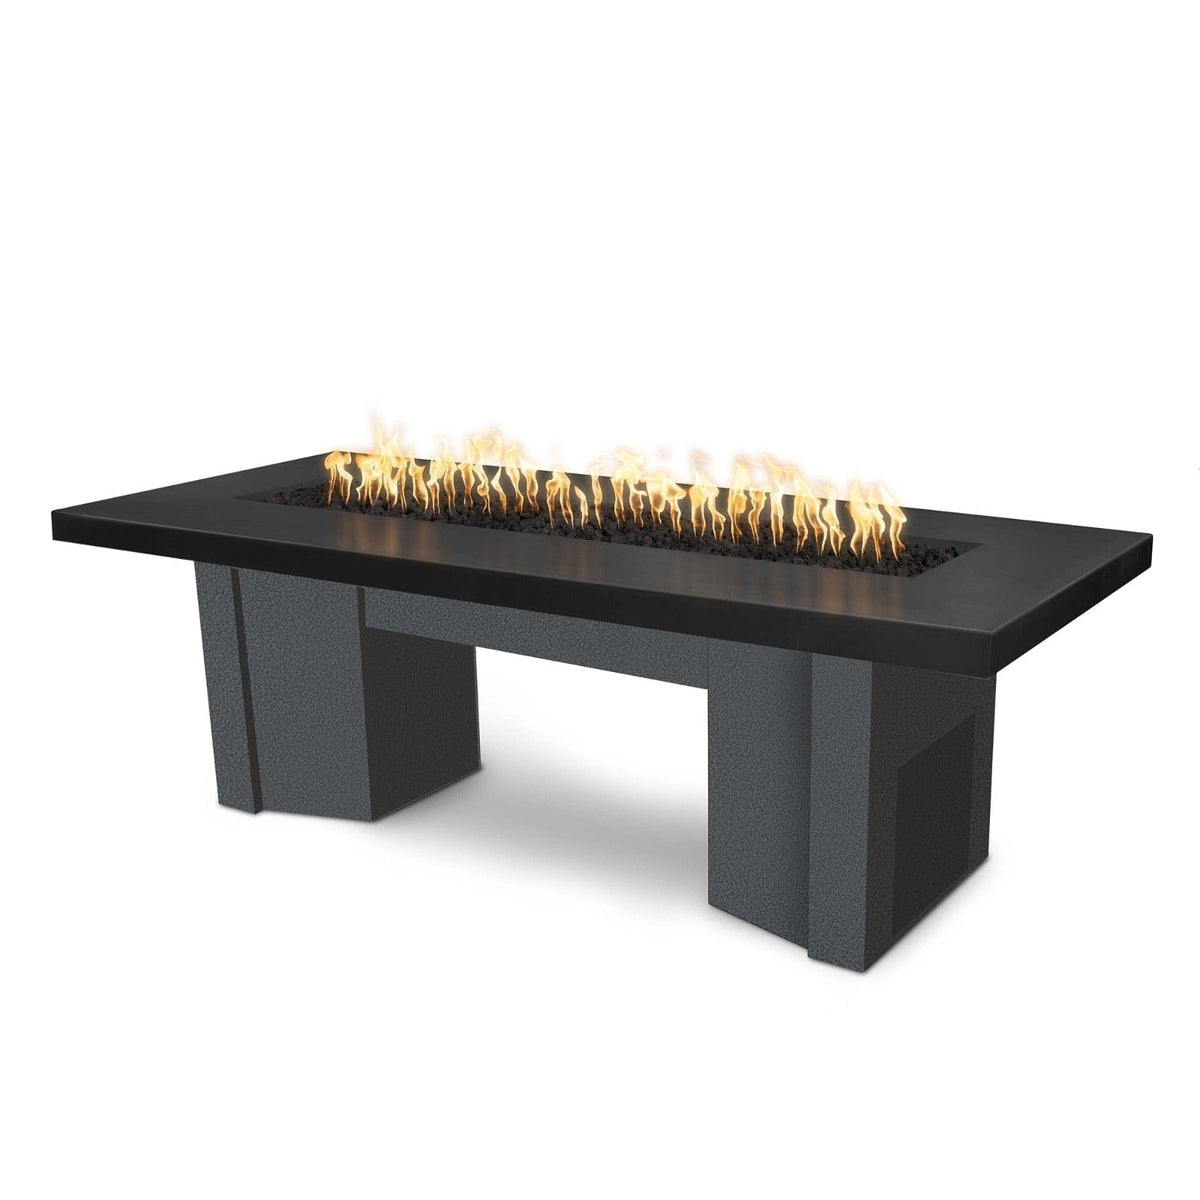 The Outdoor Plus Fire Features Black (-BLK) / Silver Vein Powder Coated Steel (-SLV) The Outdoor Plus 60&quot; Alameda Fire Table Smooth Concrete in Liquid Propane - Flame Sense System with Push Button Spark Igniter / OPT-ALMGFRC60FSEN-LP